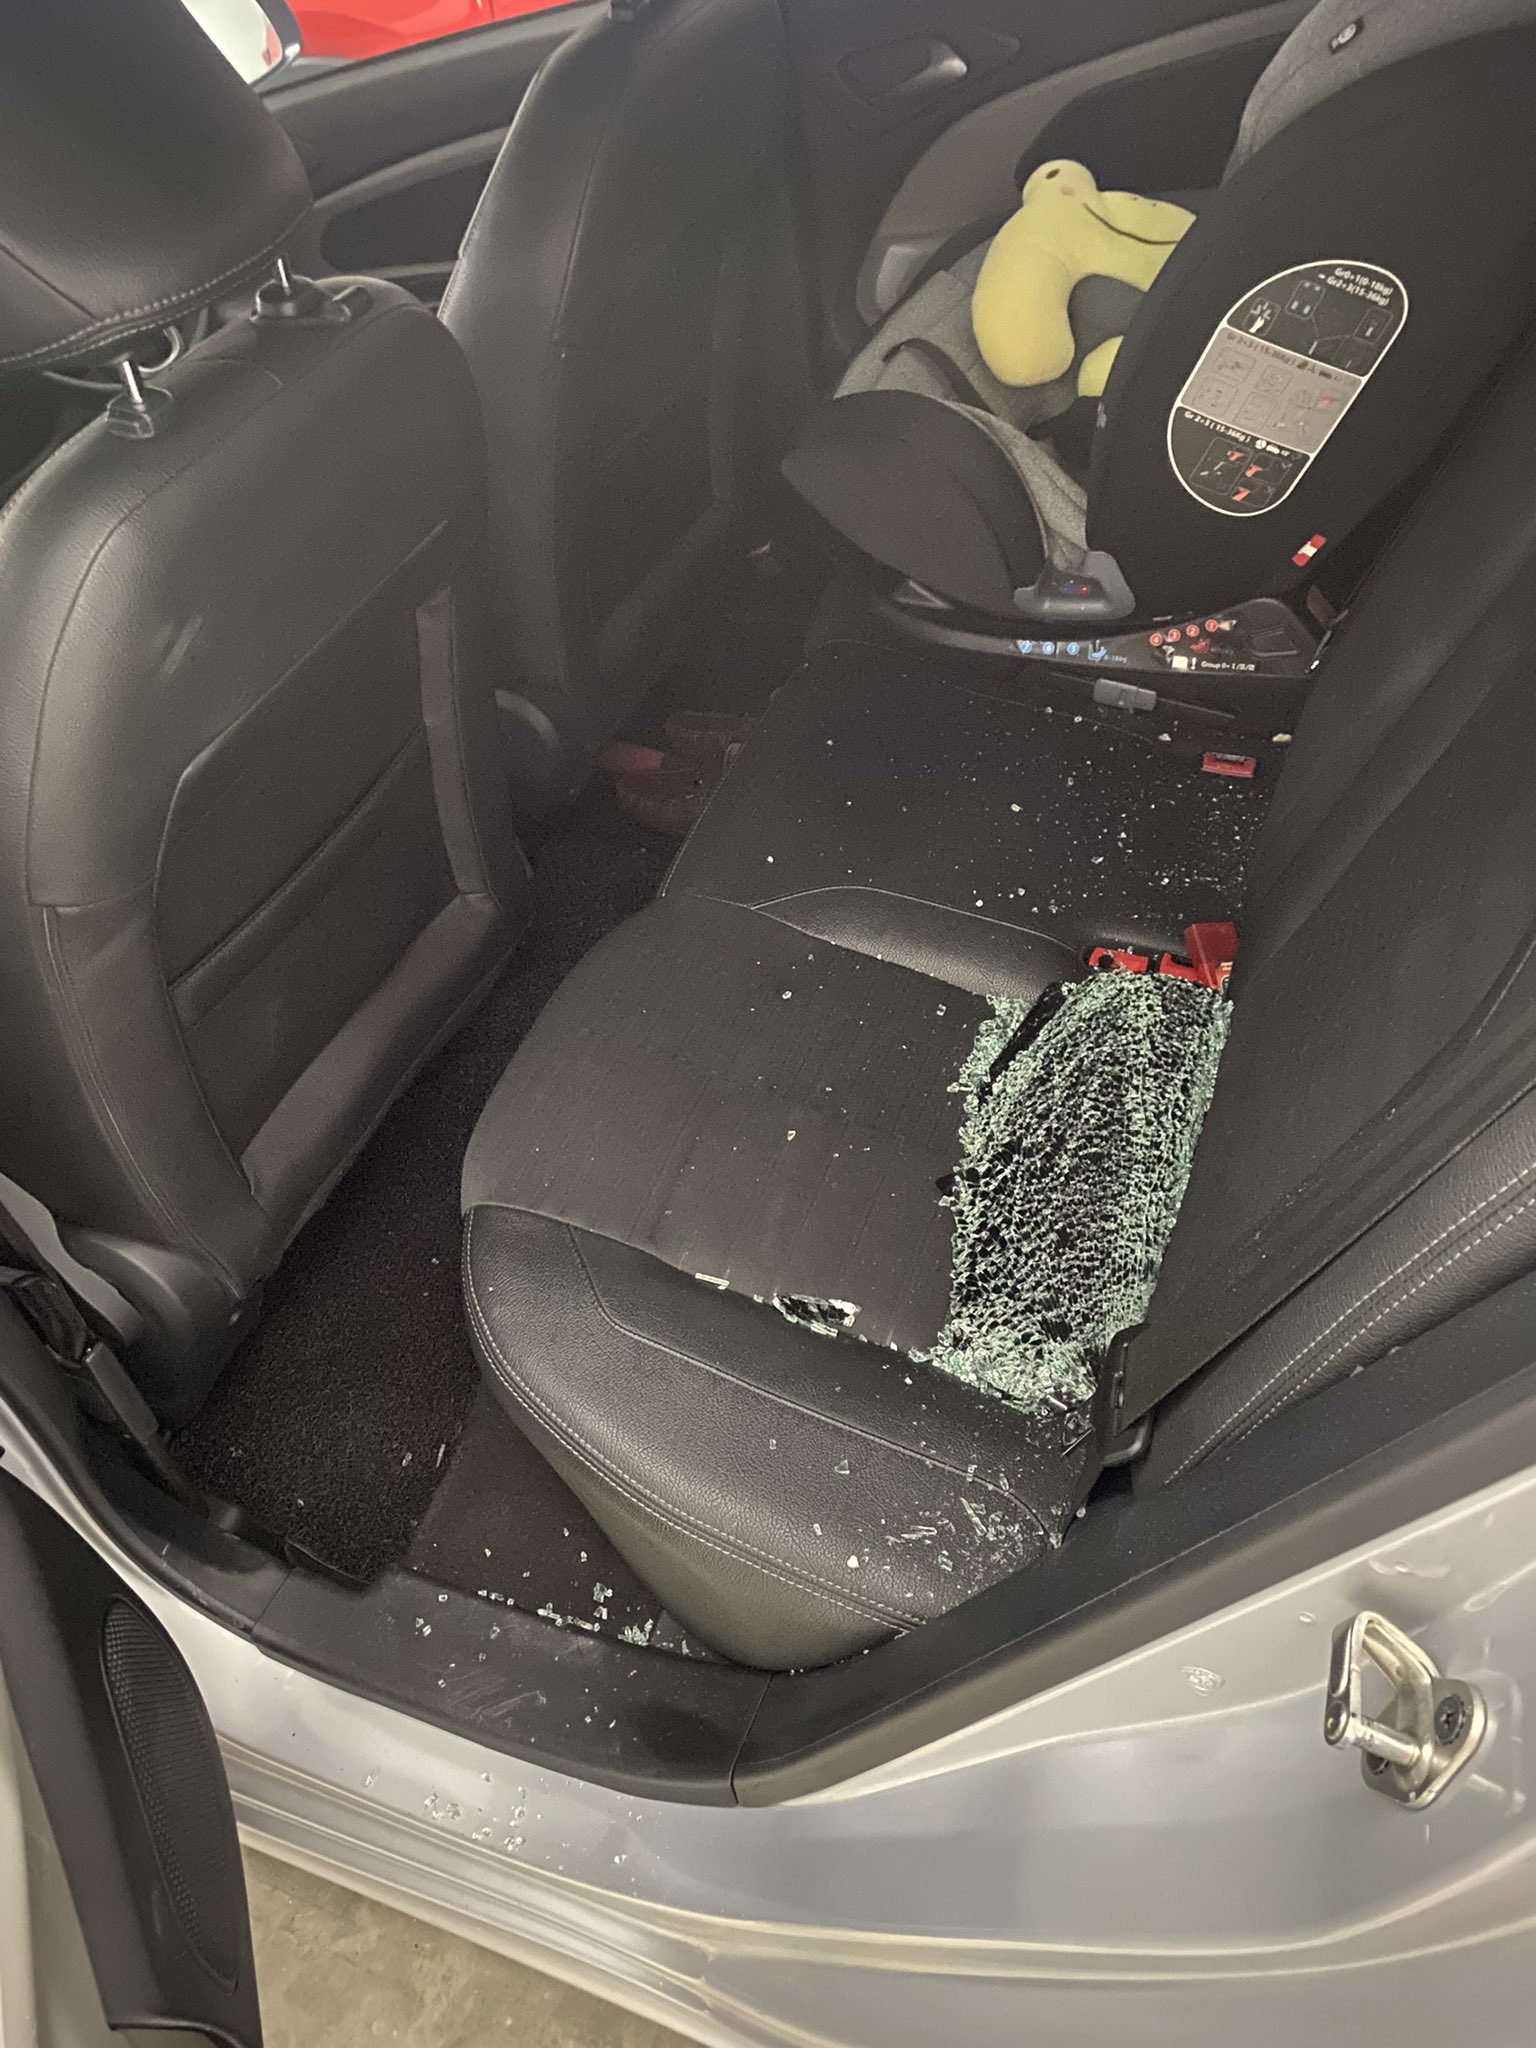 The backseat of his car was showered in glass shards. Image credit: @irfannhaziq_